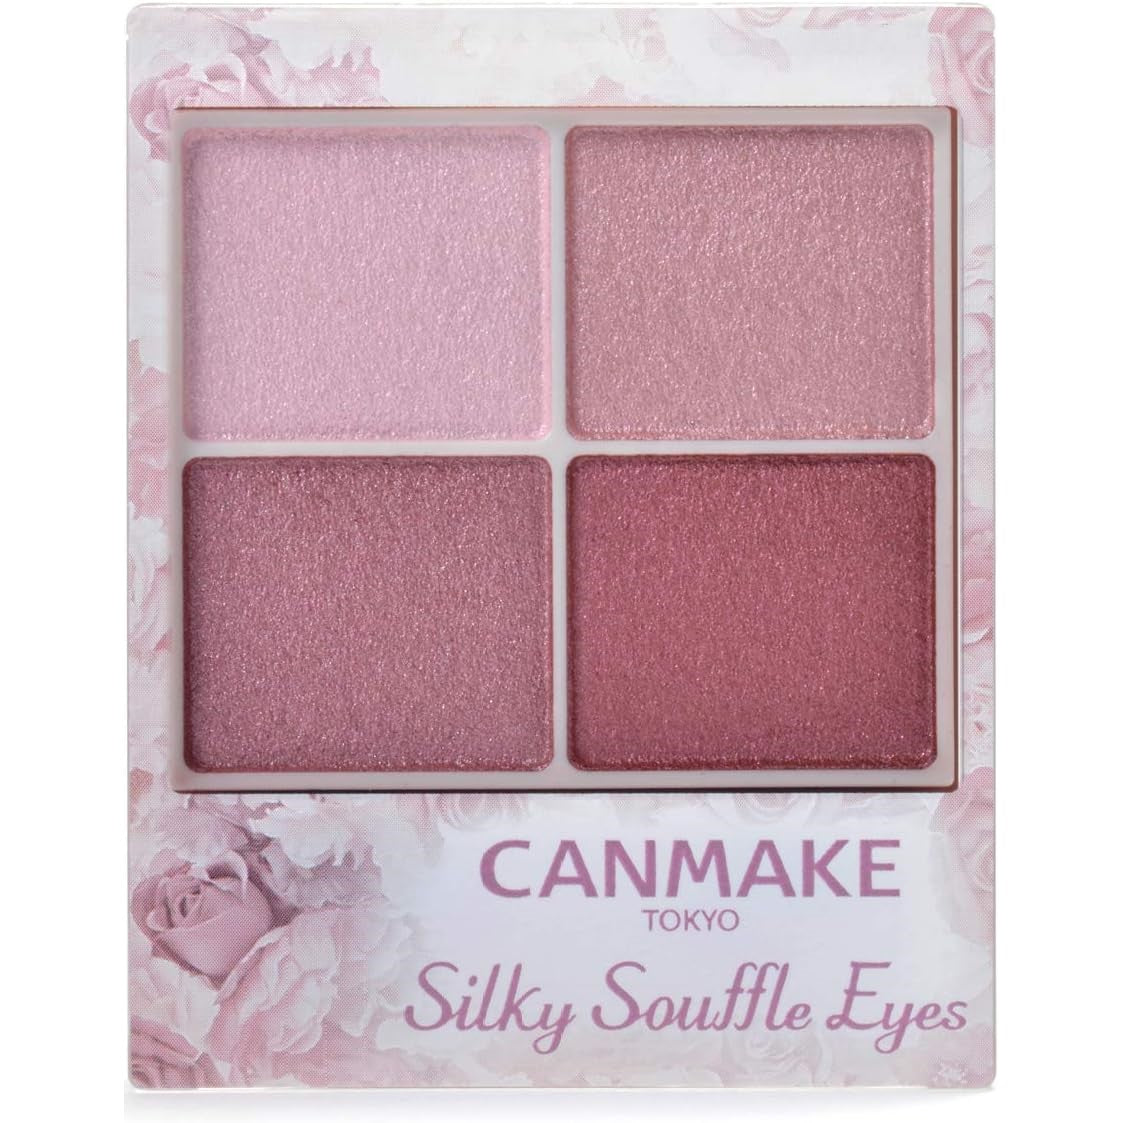 Canmake Silky Souffle Eyes